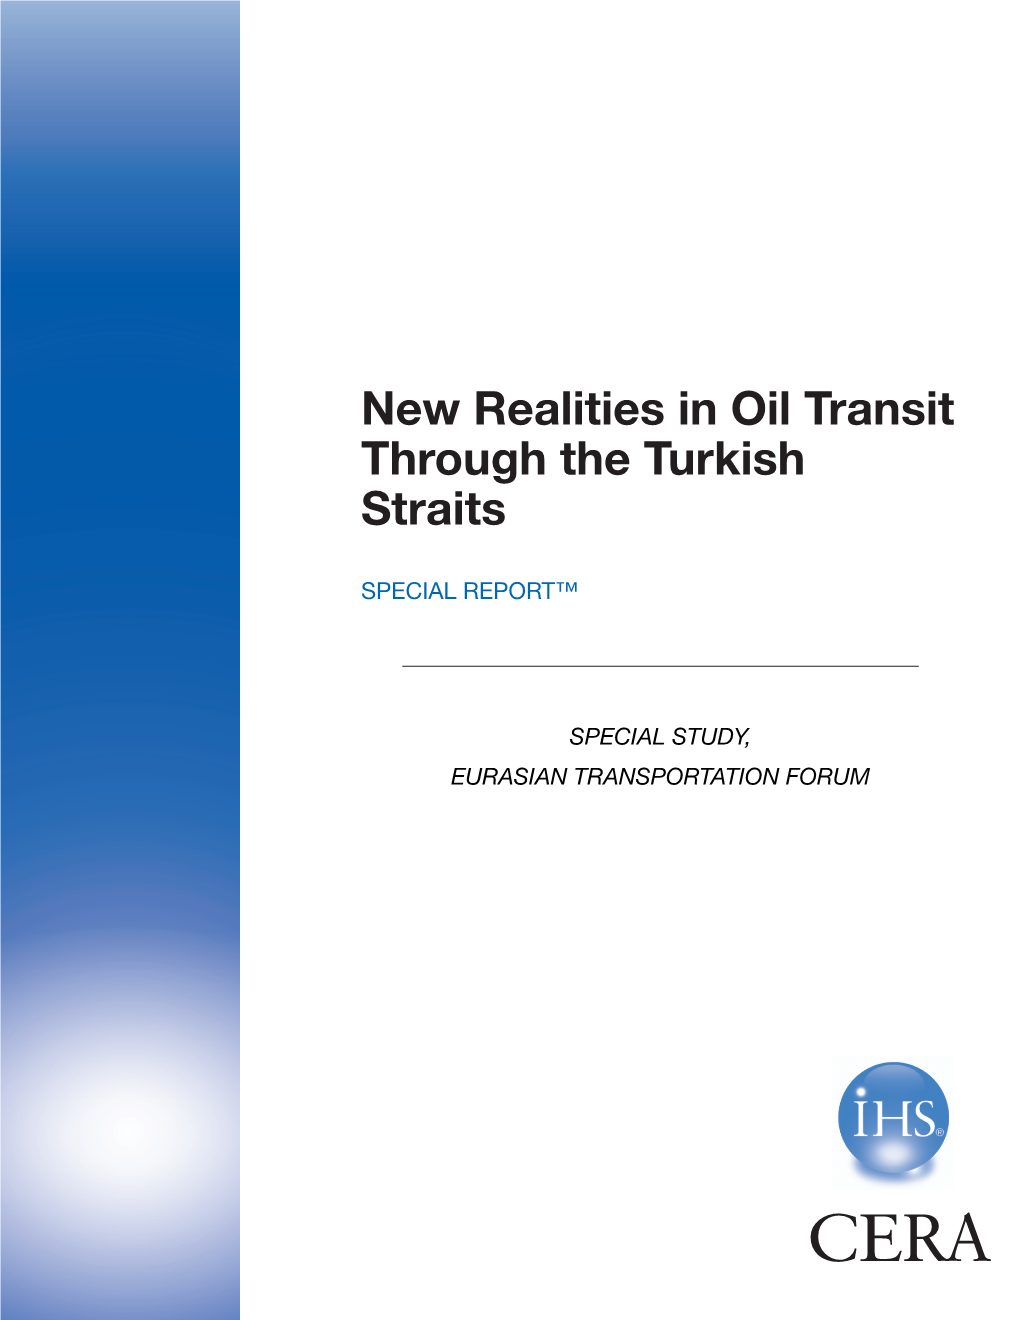 New Realities in Oil Transit Through the Turkish Straits